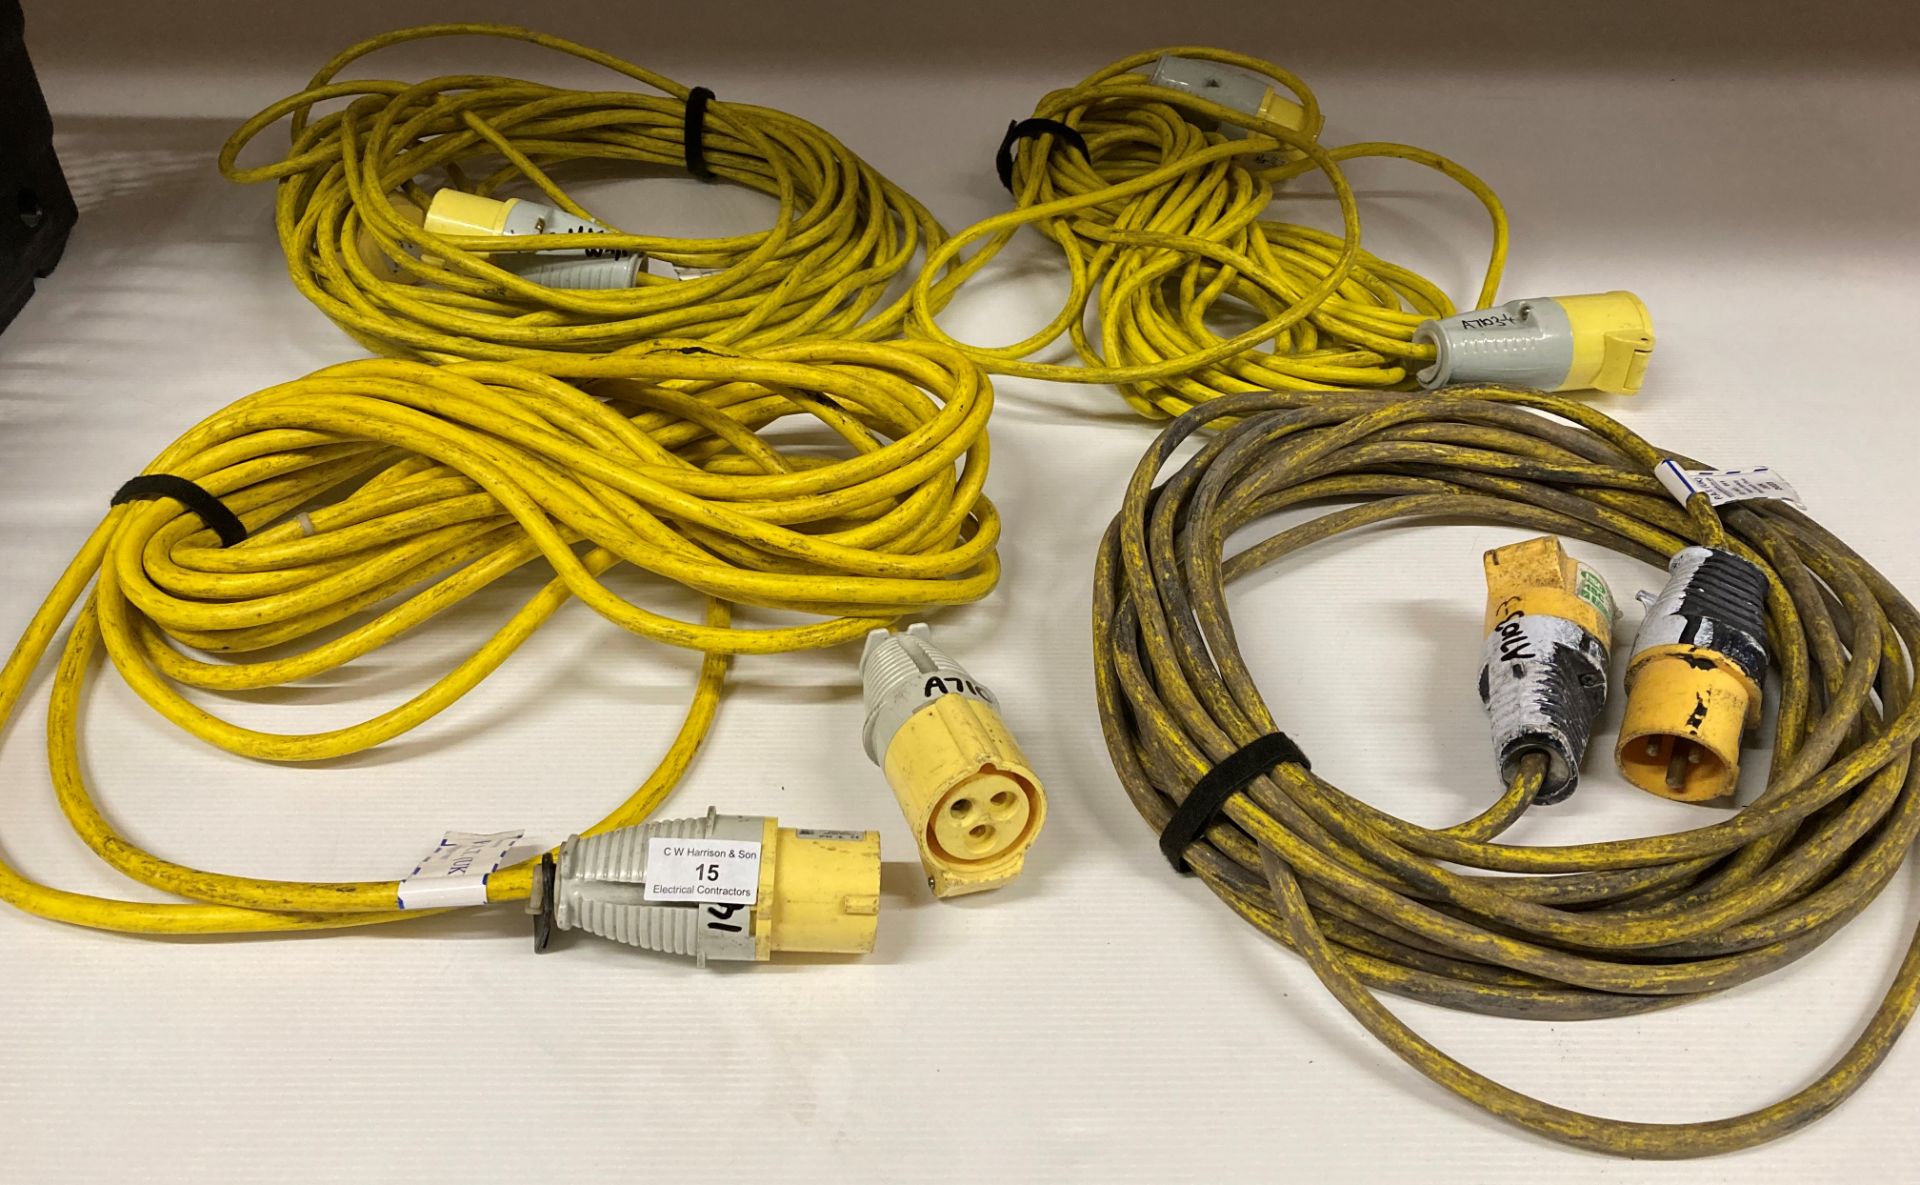 Contents to basket - 4 x 110v extension cables (Saleroom location: F07 FLOOR)